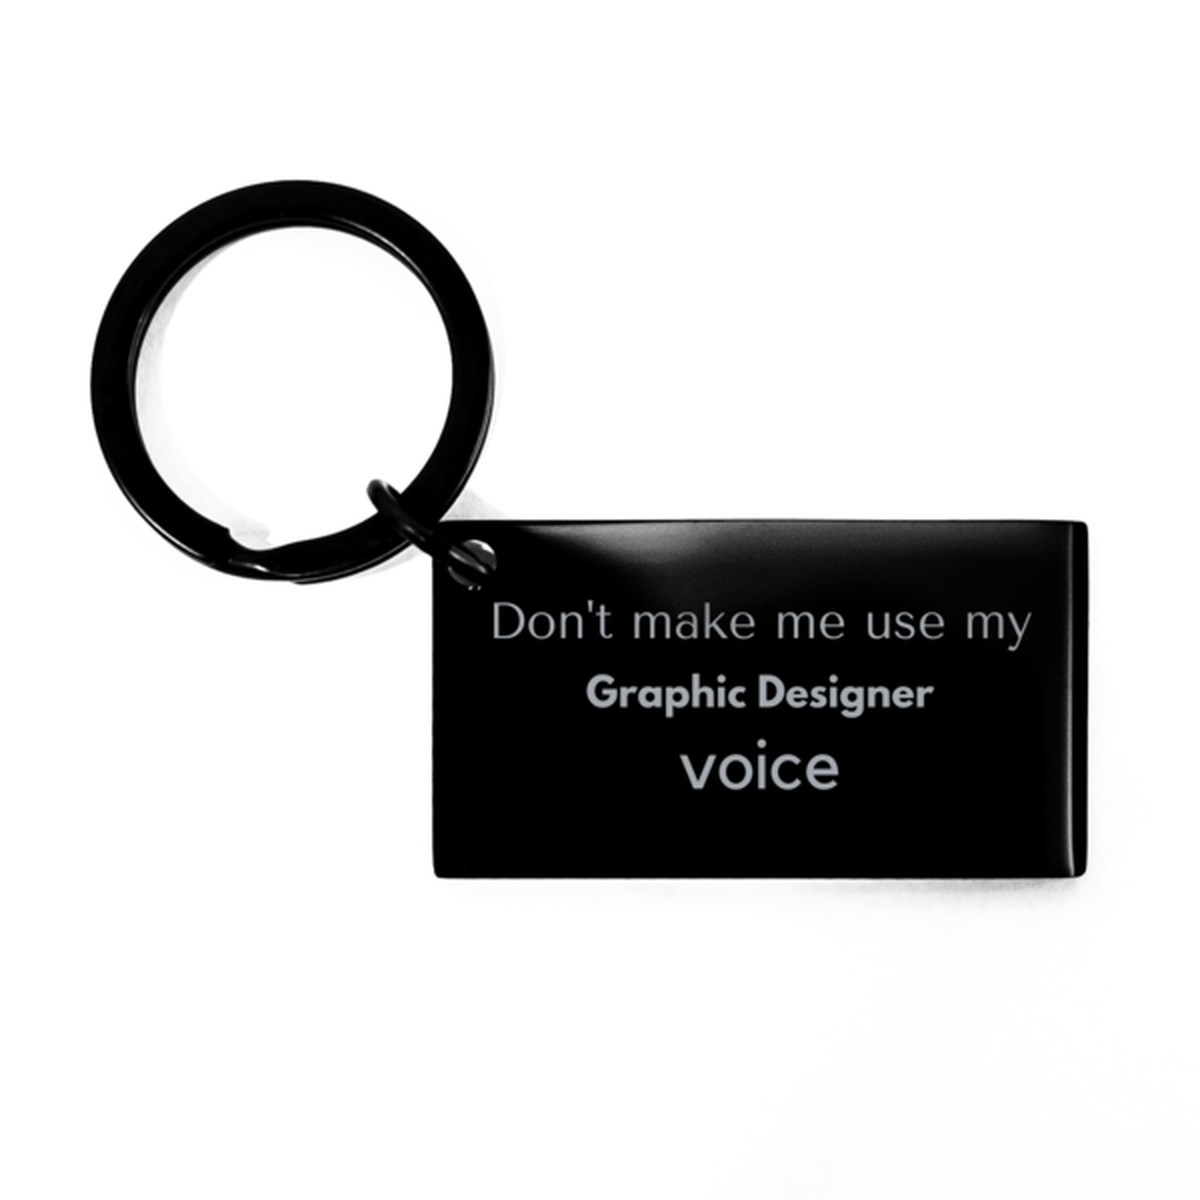 Don't make me use my Graphic Designer voice, Sarcasm Graphic Designer Gifts, Christmas Graphic Designer Keychain Birthday Unique Gifts For Graphic Designer Coworkers, Men, Women, Colleague, Friends